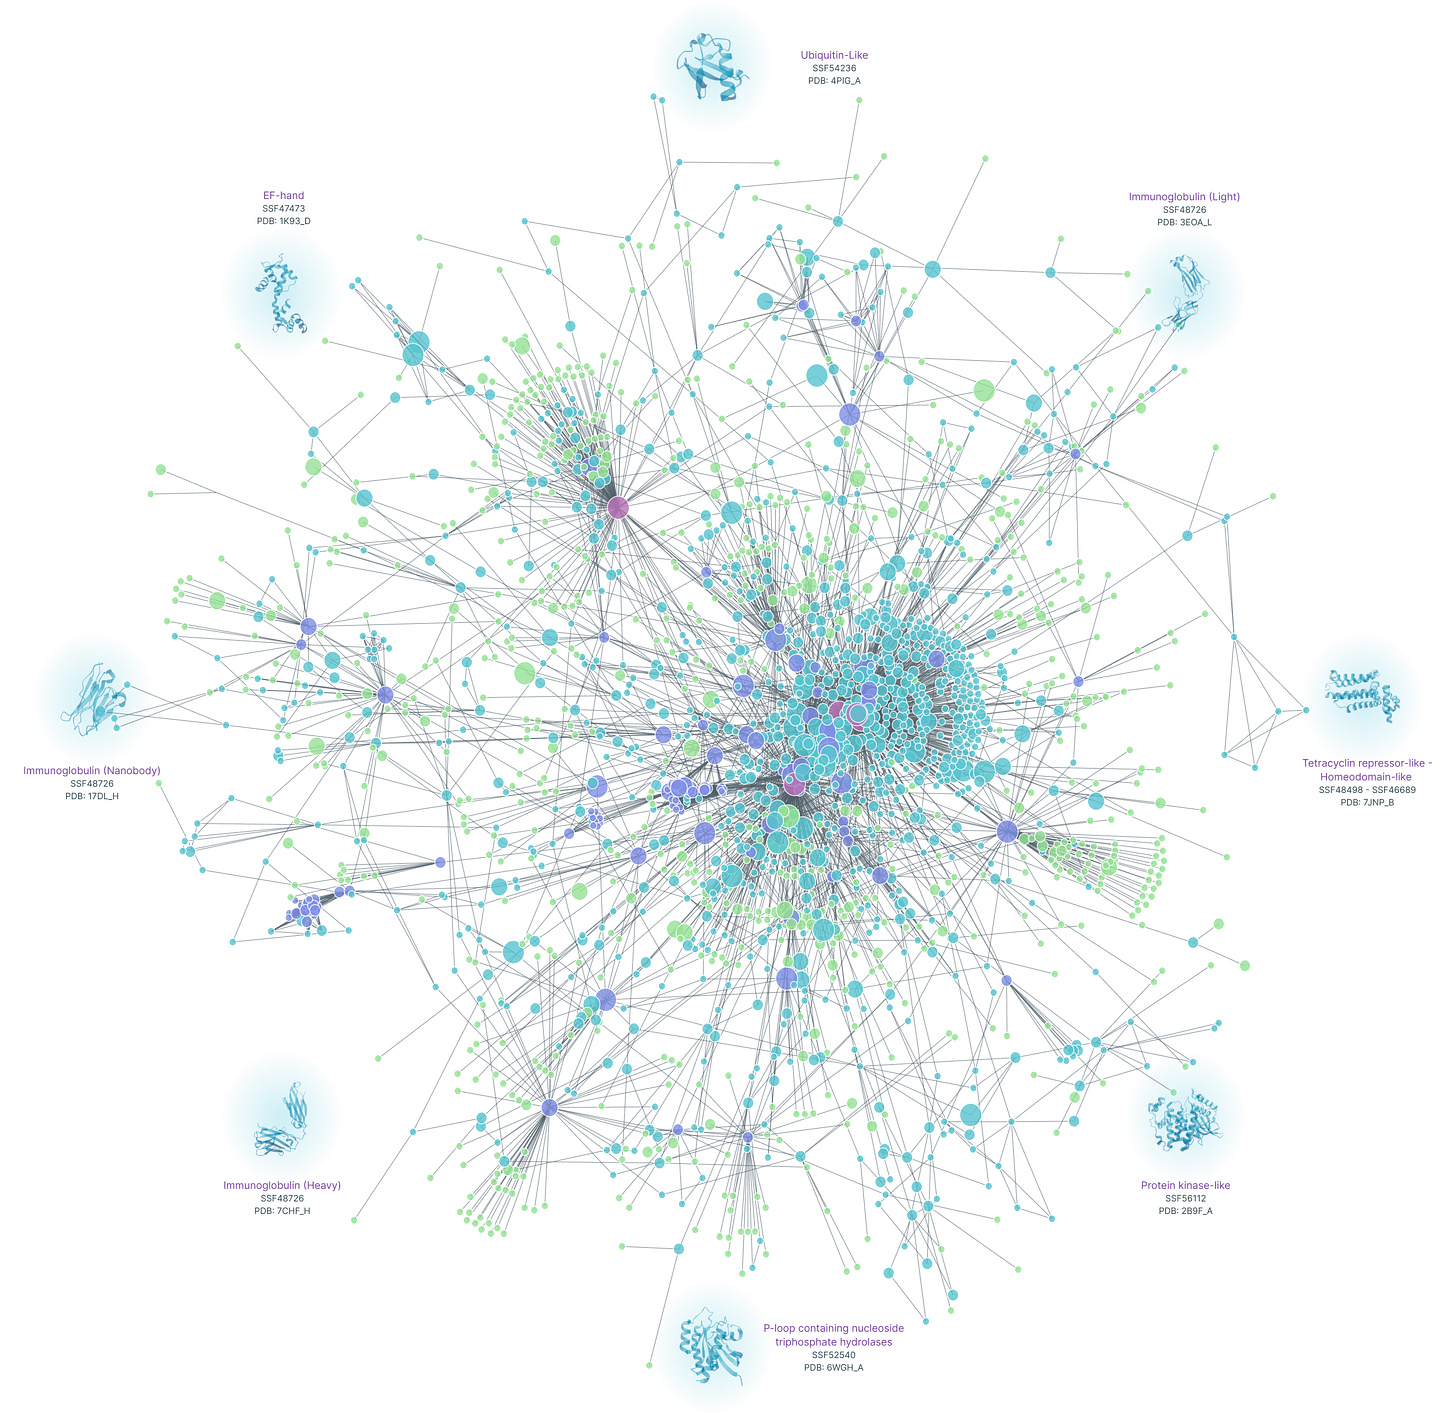 Protein-Protein Interaction network graph of the largest connected component of the ProteinFlow dataset (2023), which contains over 2K protein clusters connected by their protein interactions.